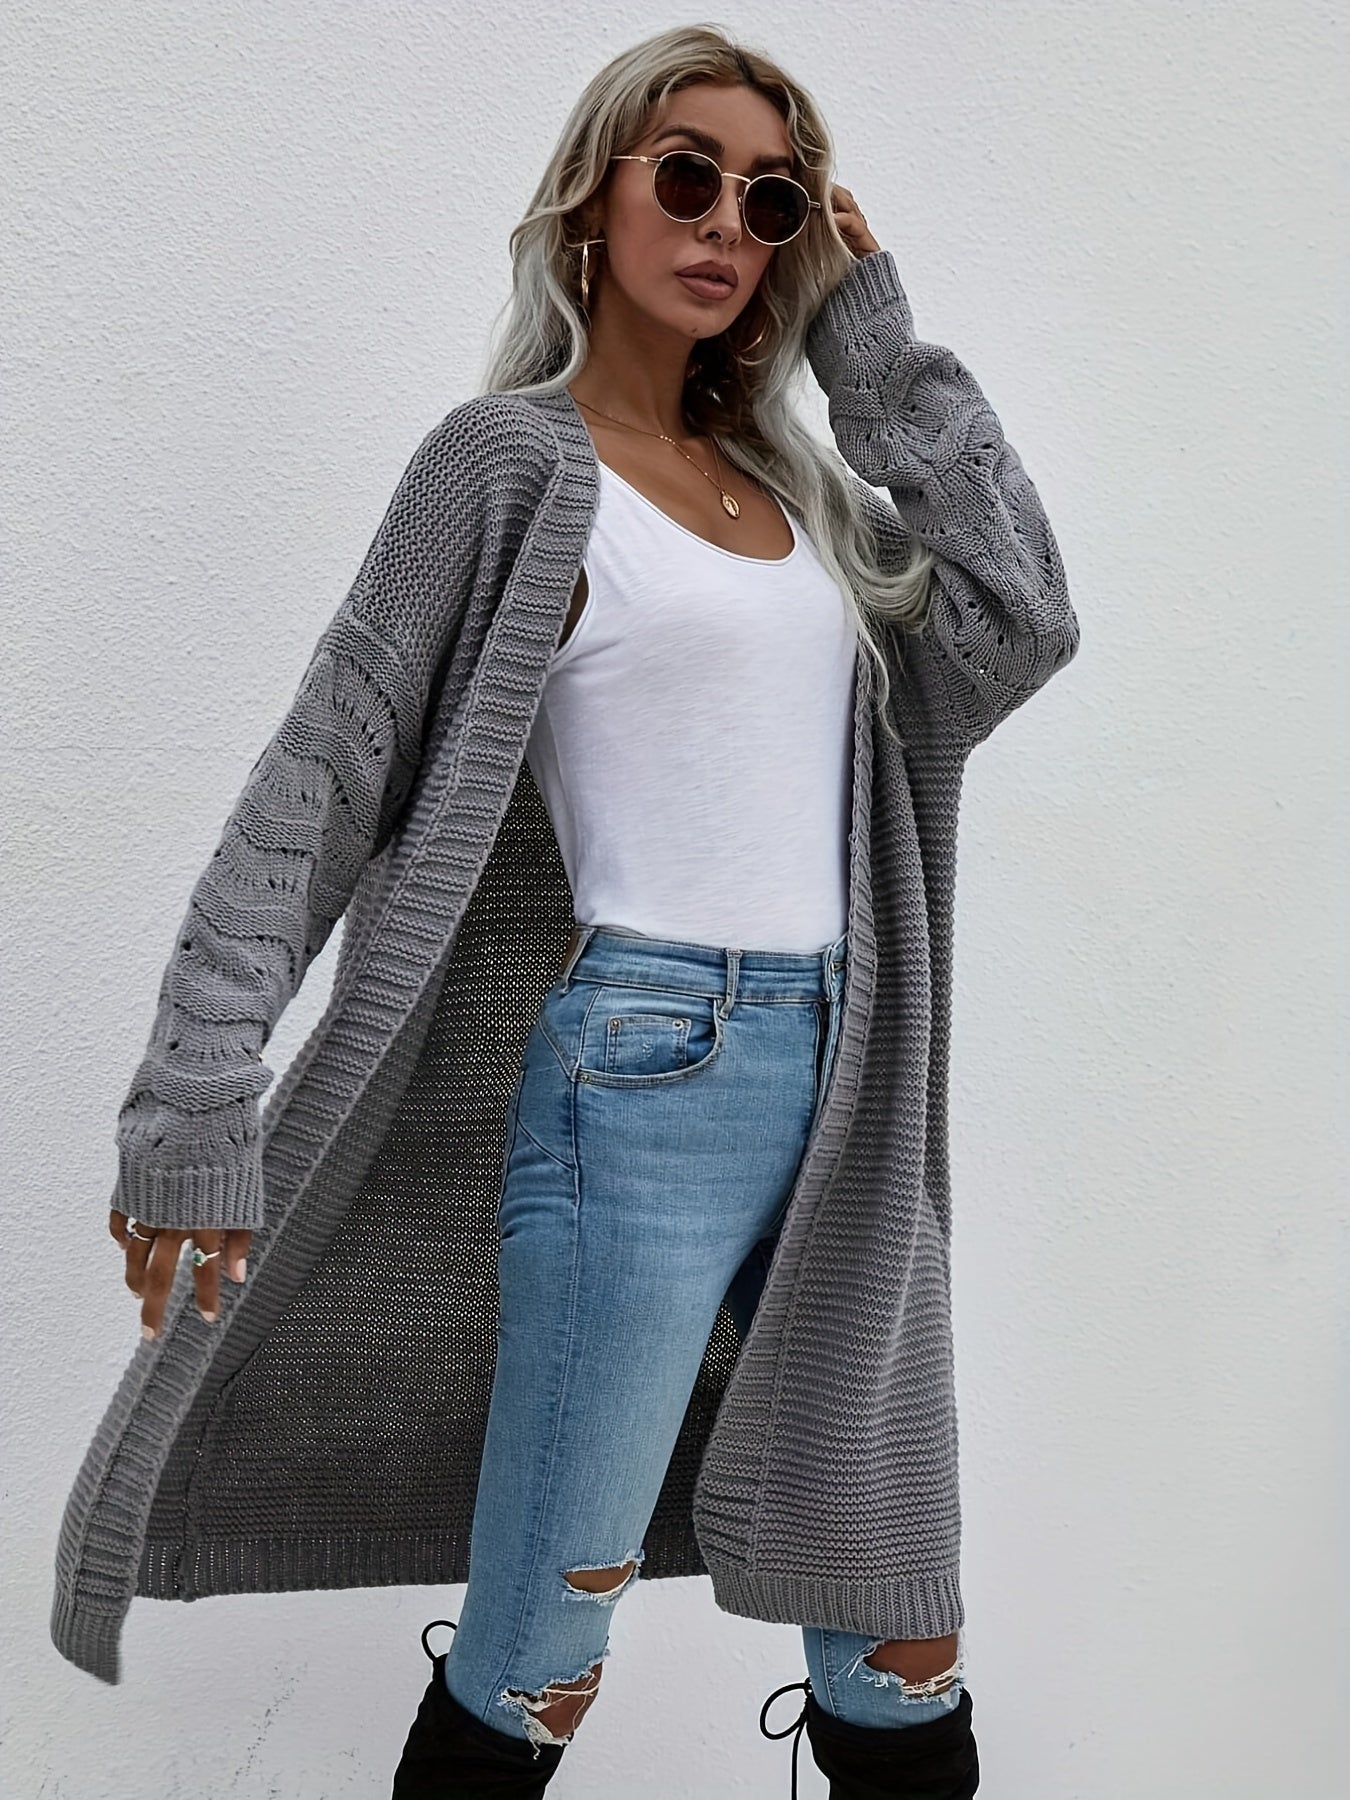 Antmvs Solid Open Front Mid Length Cardigan, Casual Long Sleeve Sweater For Spring & Fall, Women's Clothing